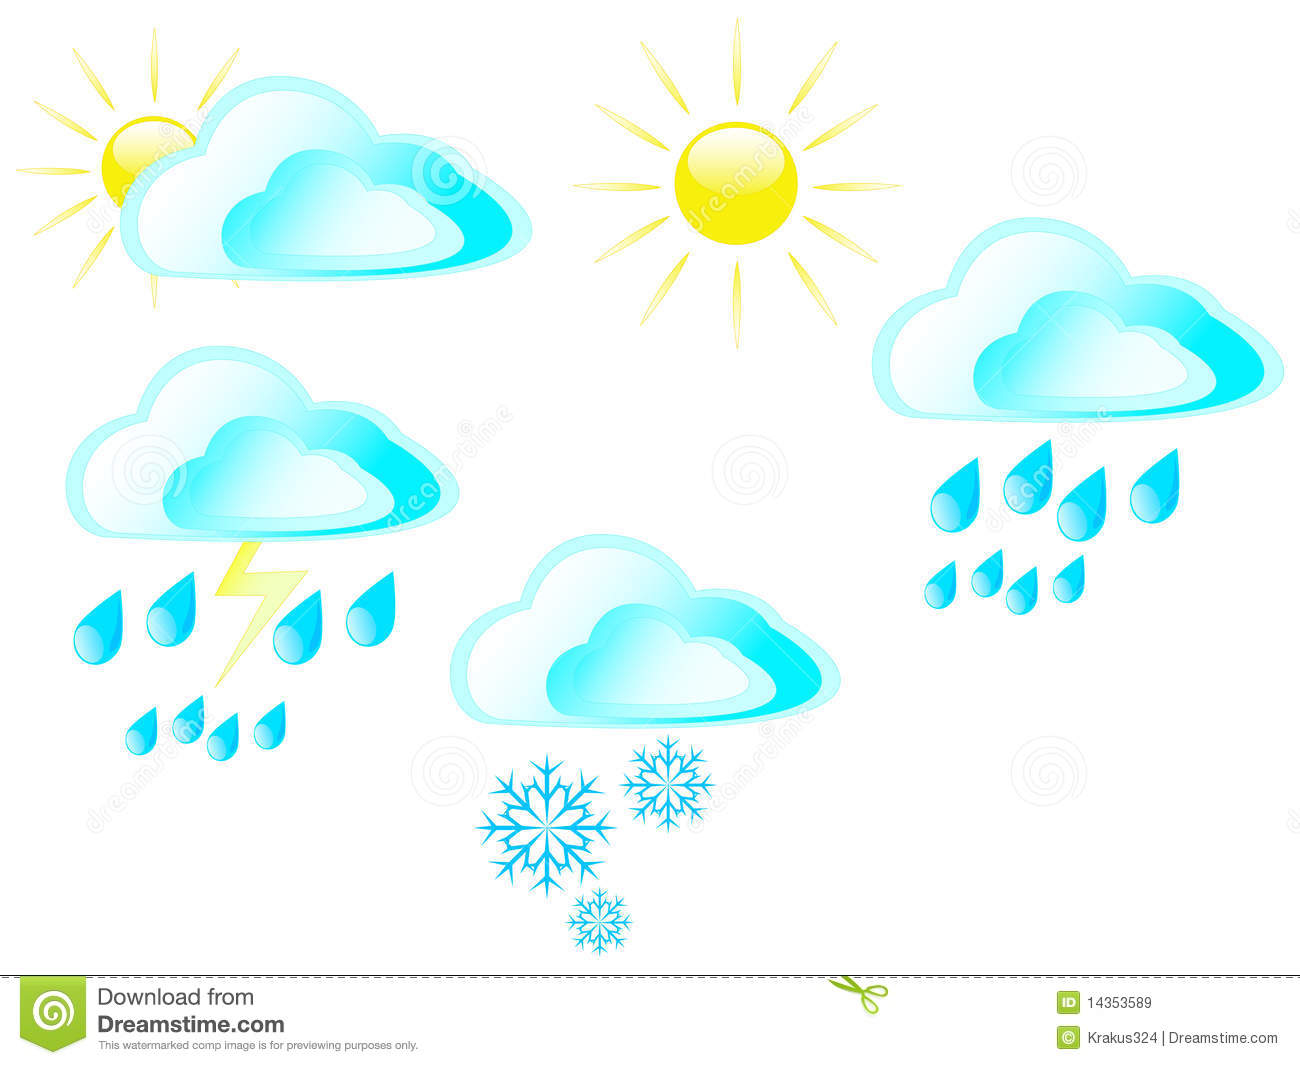 Sun Clouds Rain Snow And Storms Royalty Free Stock Images   Image